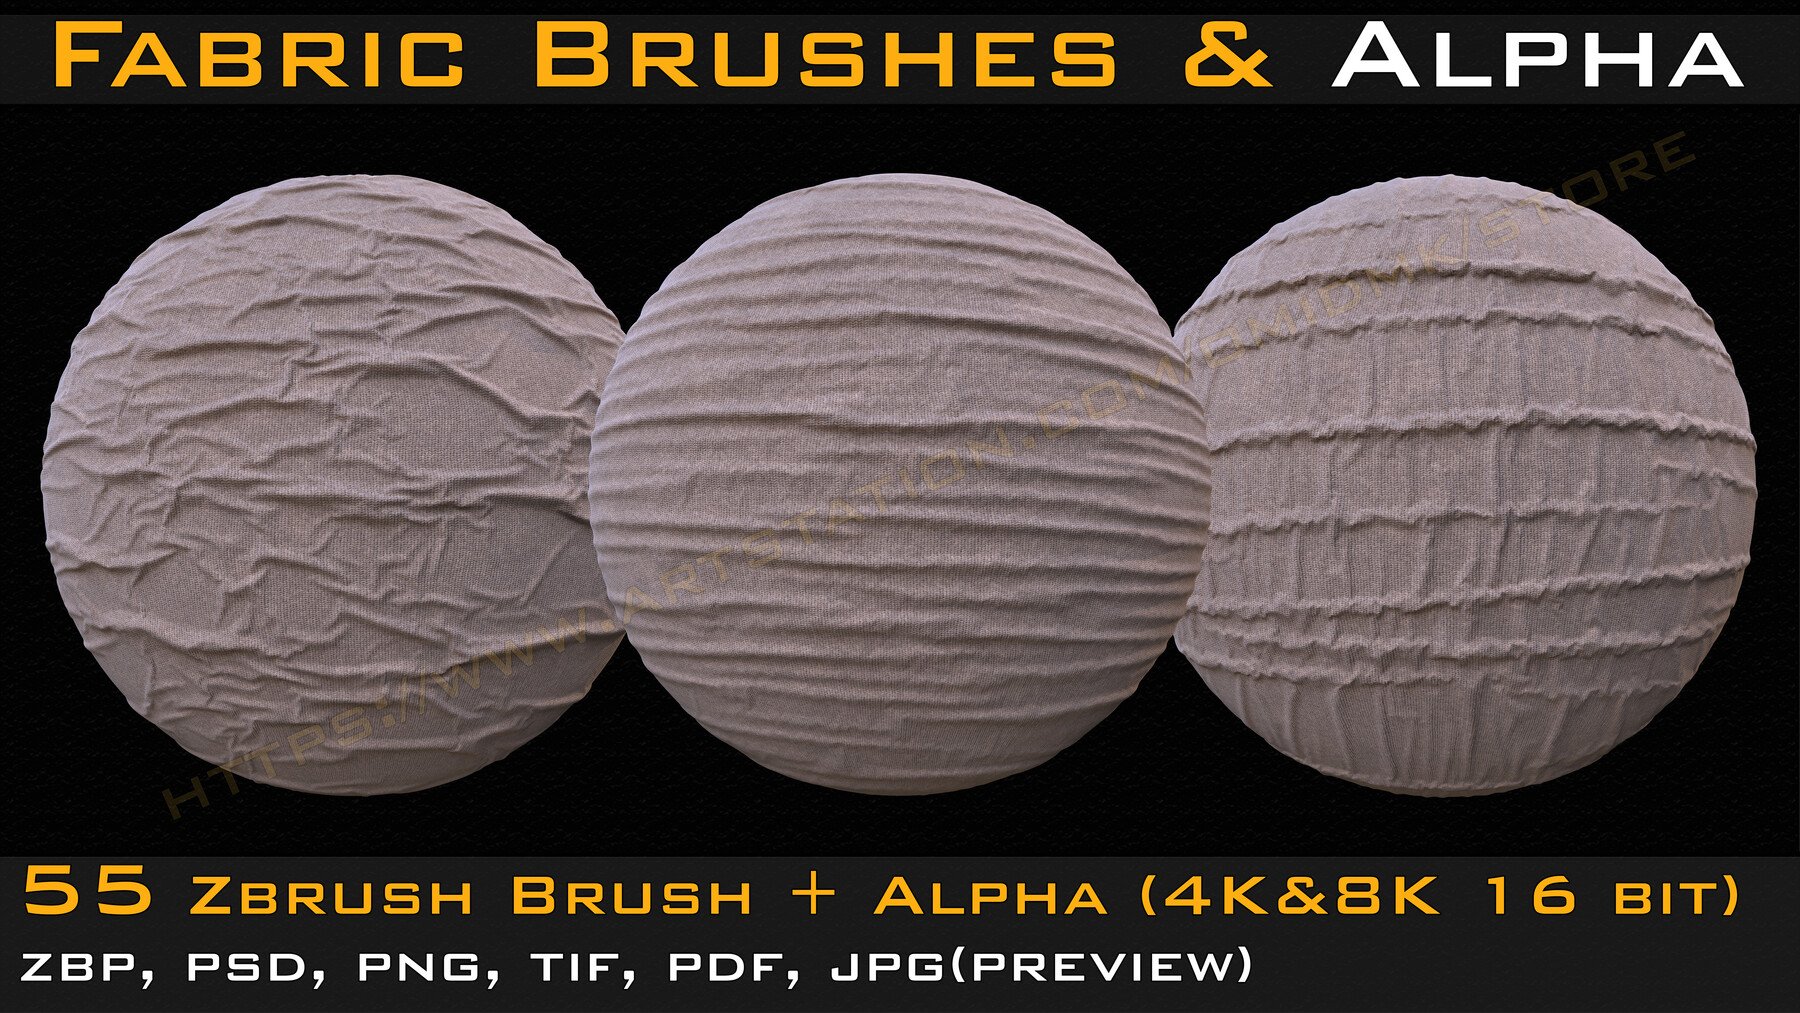 55 Fabric & Leather Brushes for ZBrush Vol.2